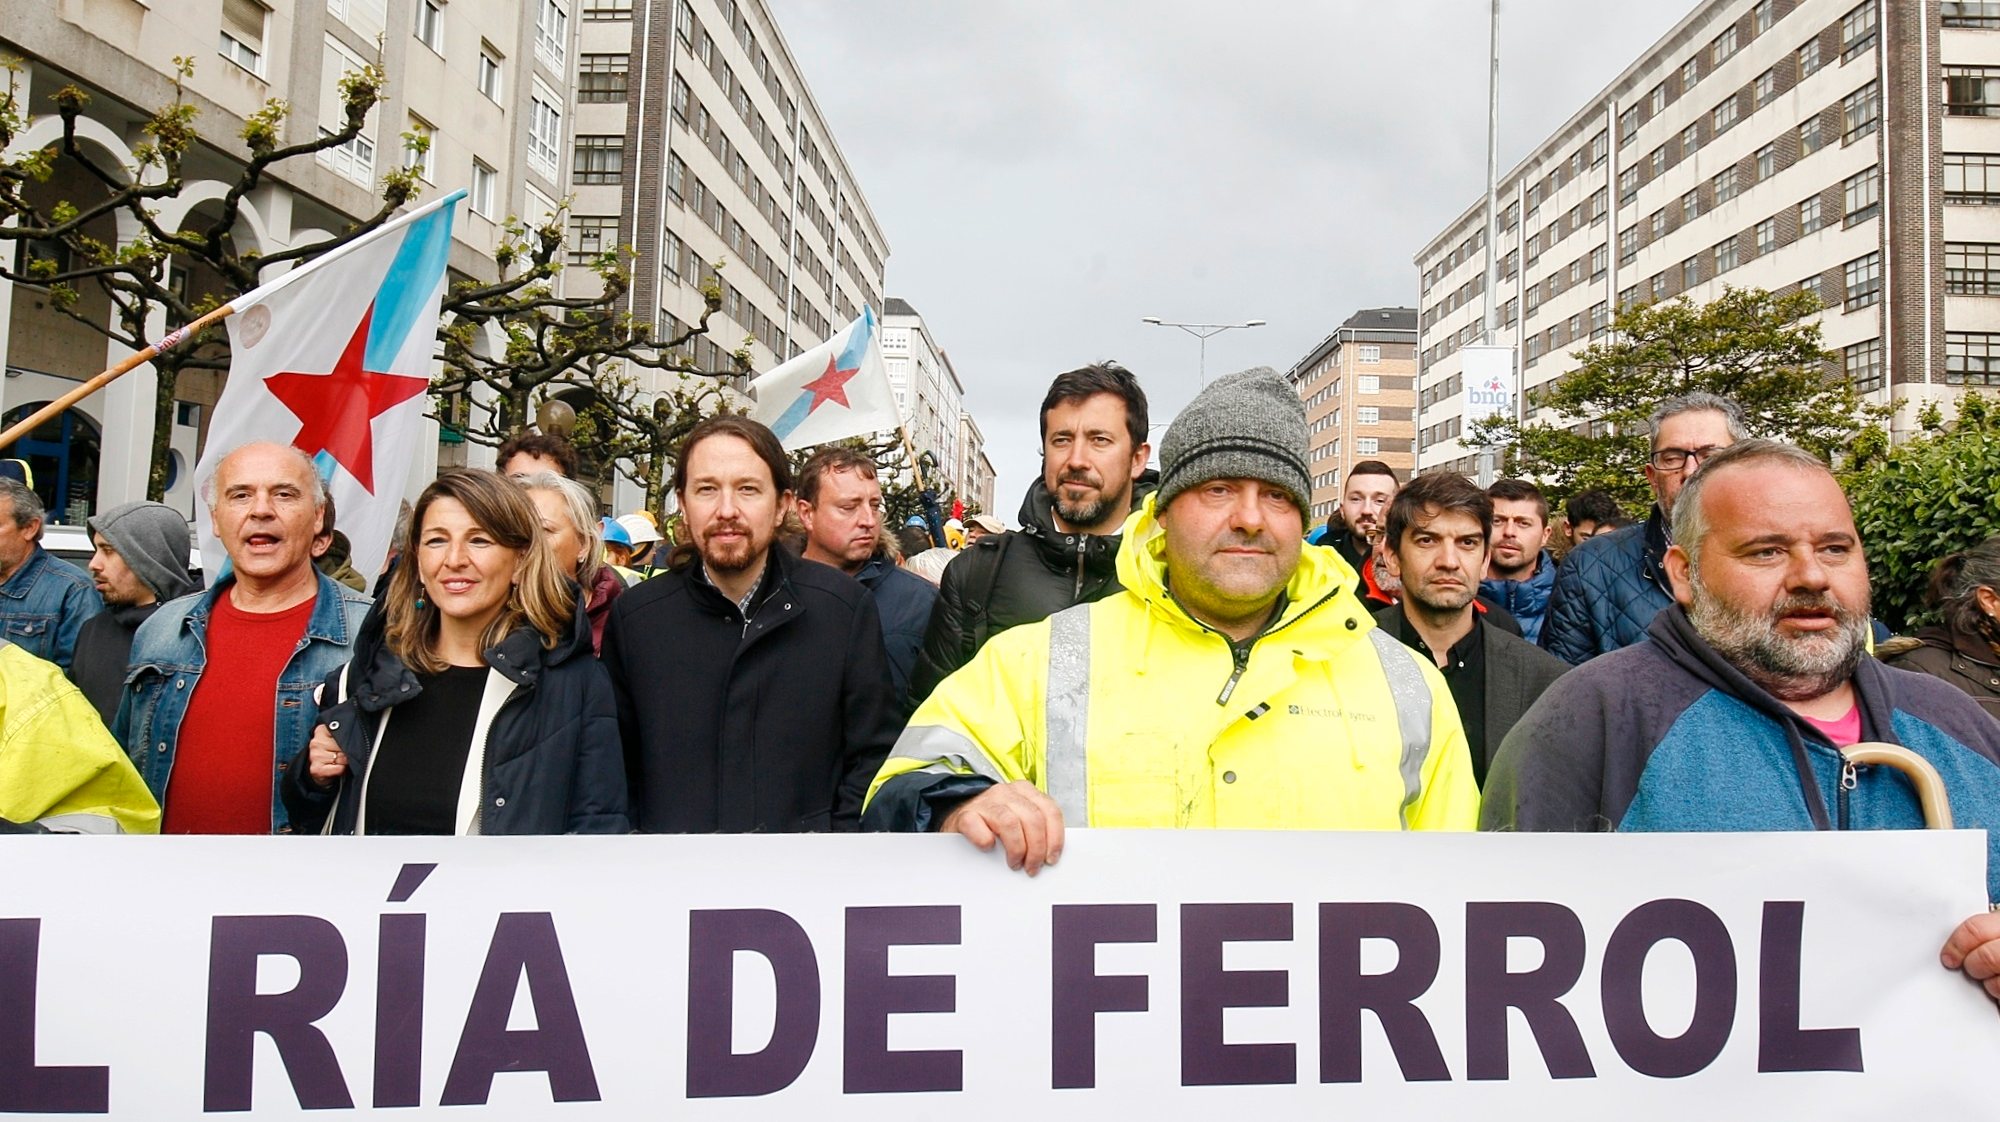 Pablo Iglesias Participates In A Demonstration In Support Of Navantia Workers